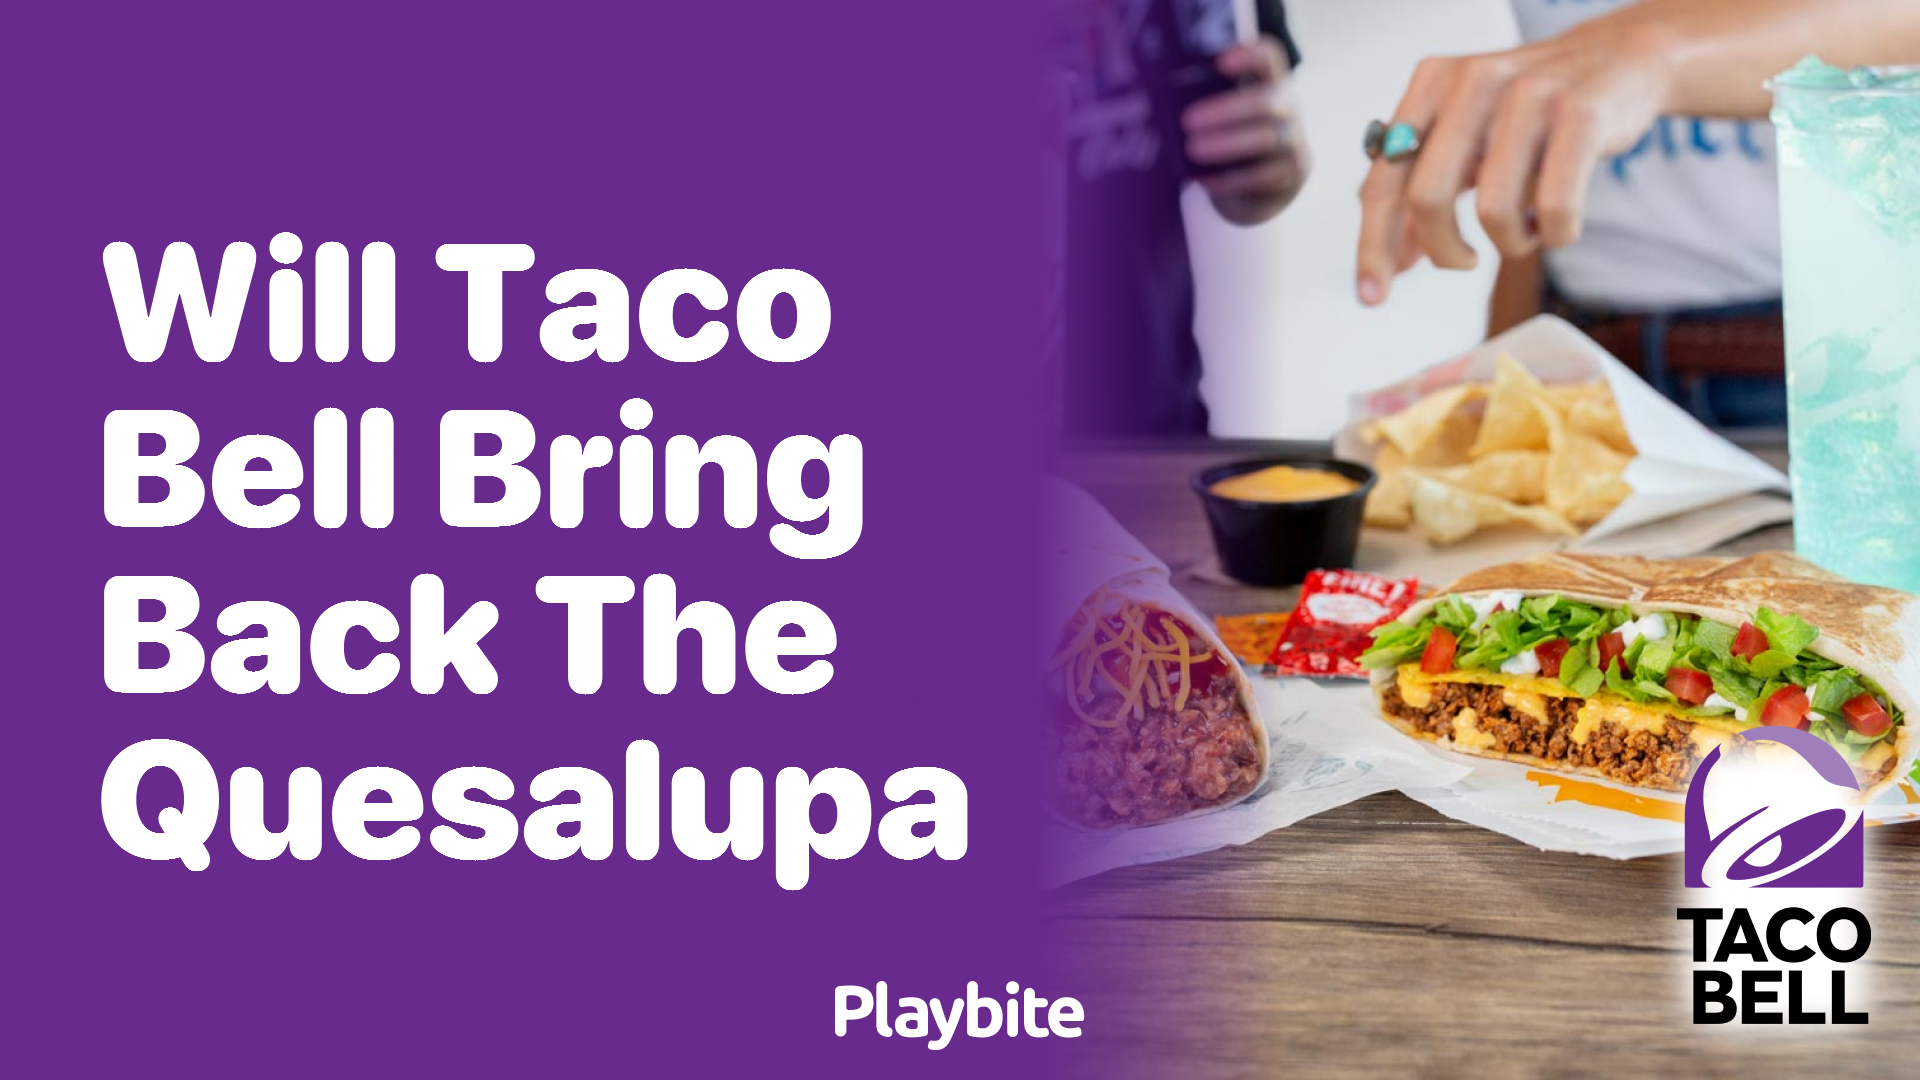 Will Taco Bell bring back the Quesalupa?